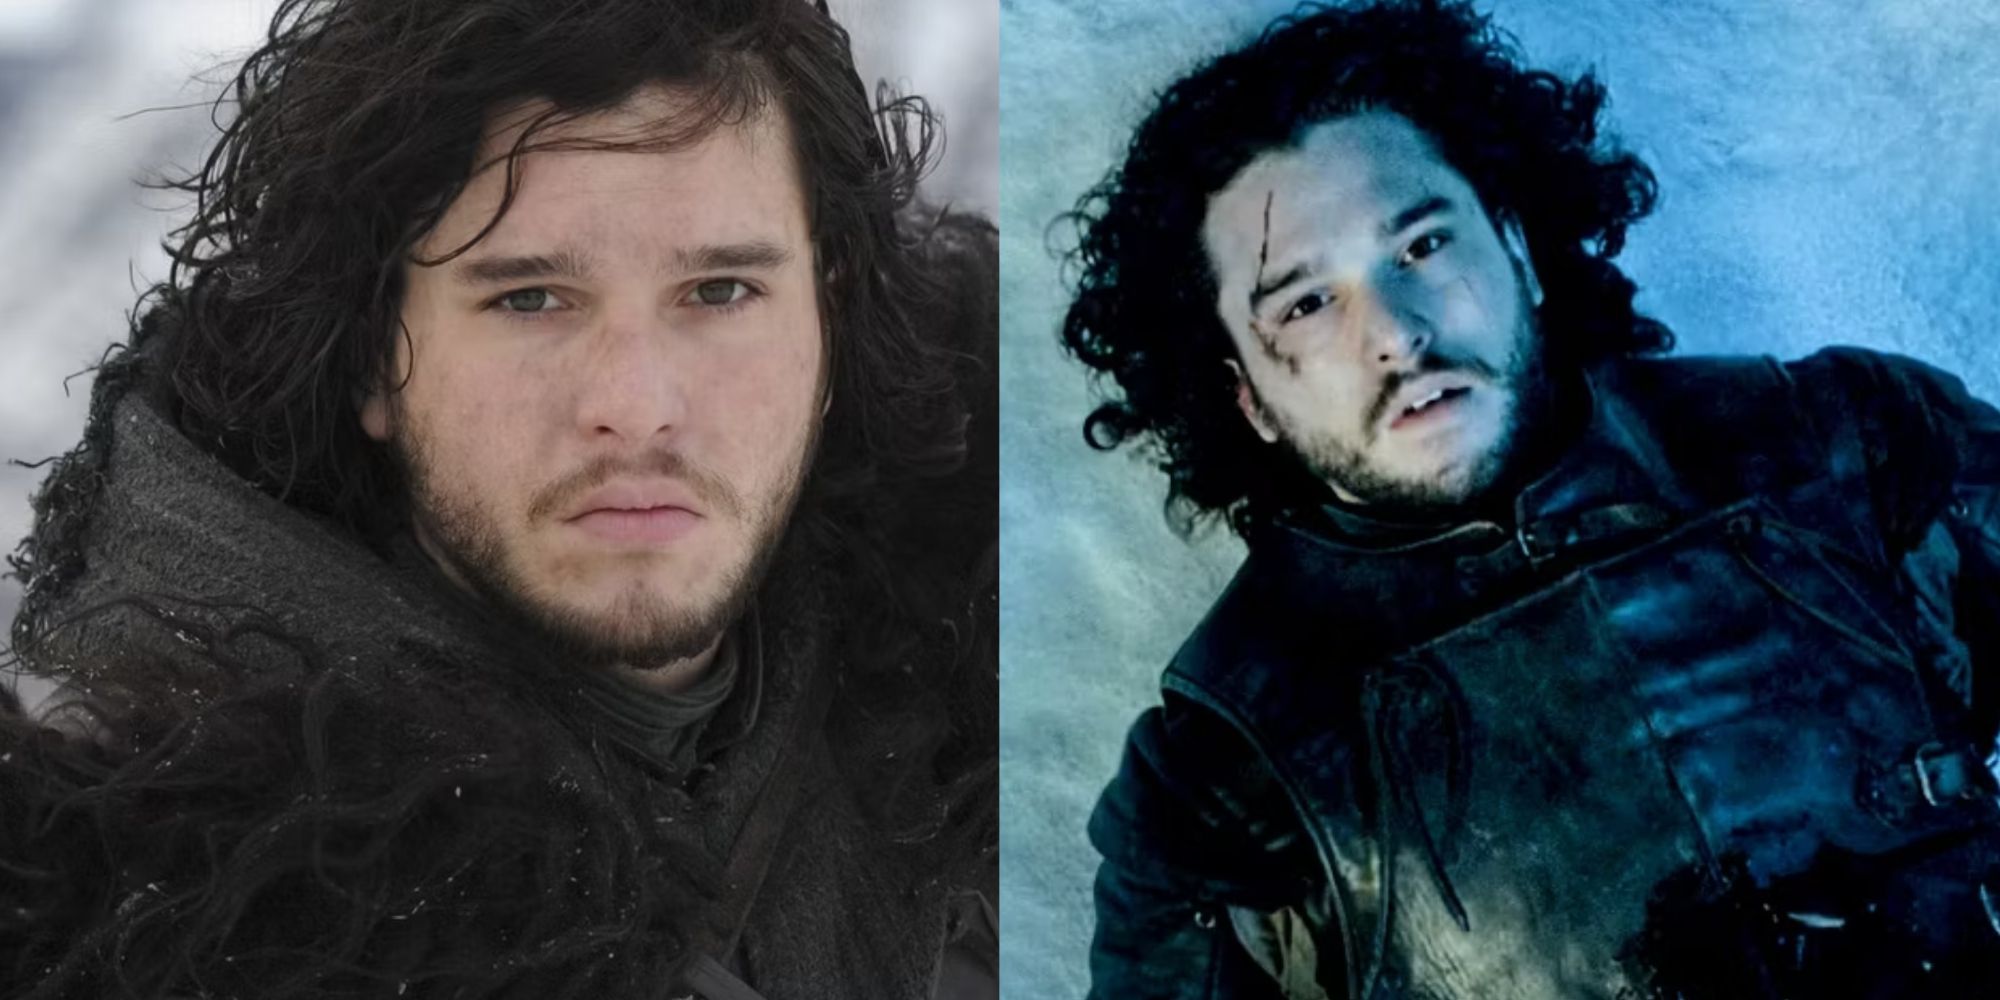 Game Of Thrones: 10 Things From The Books About Jon Snow That The Show Changed